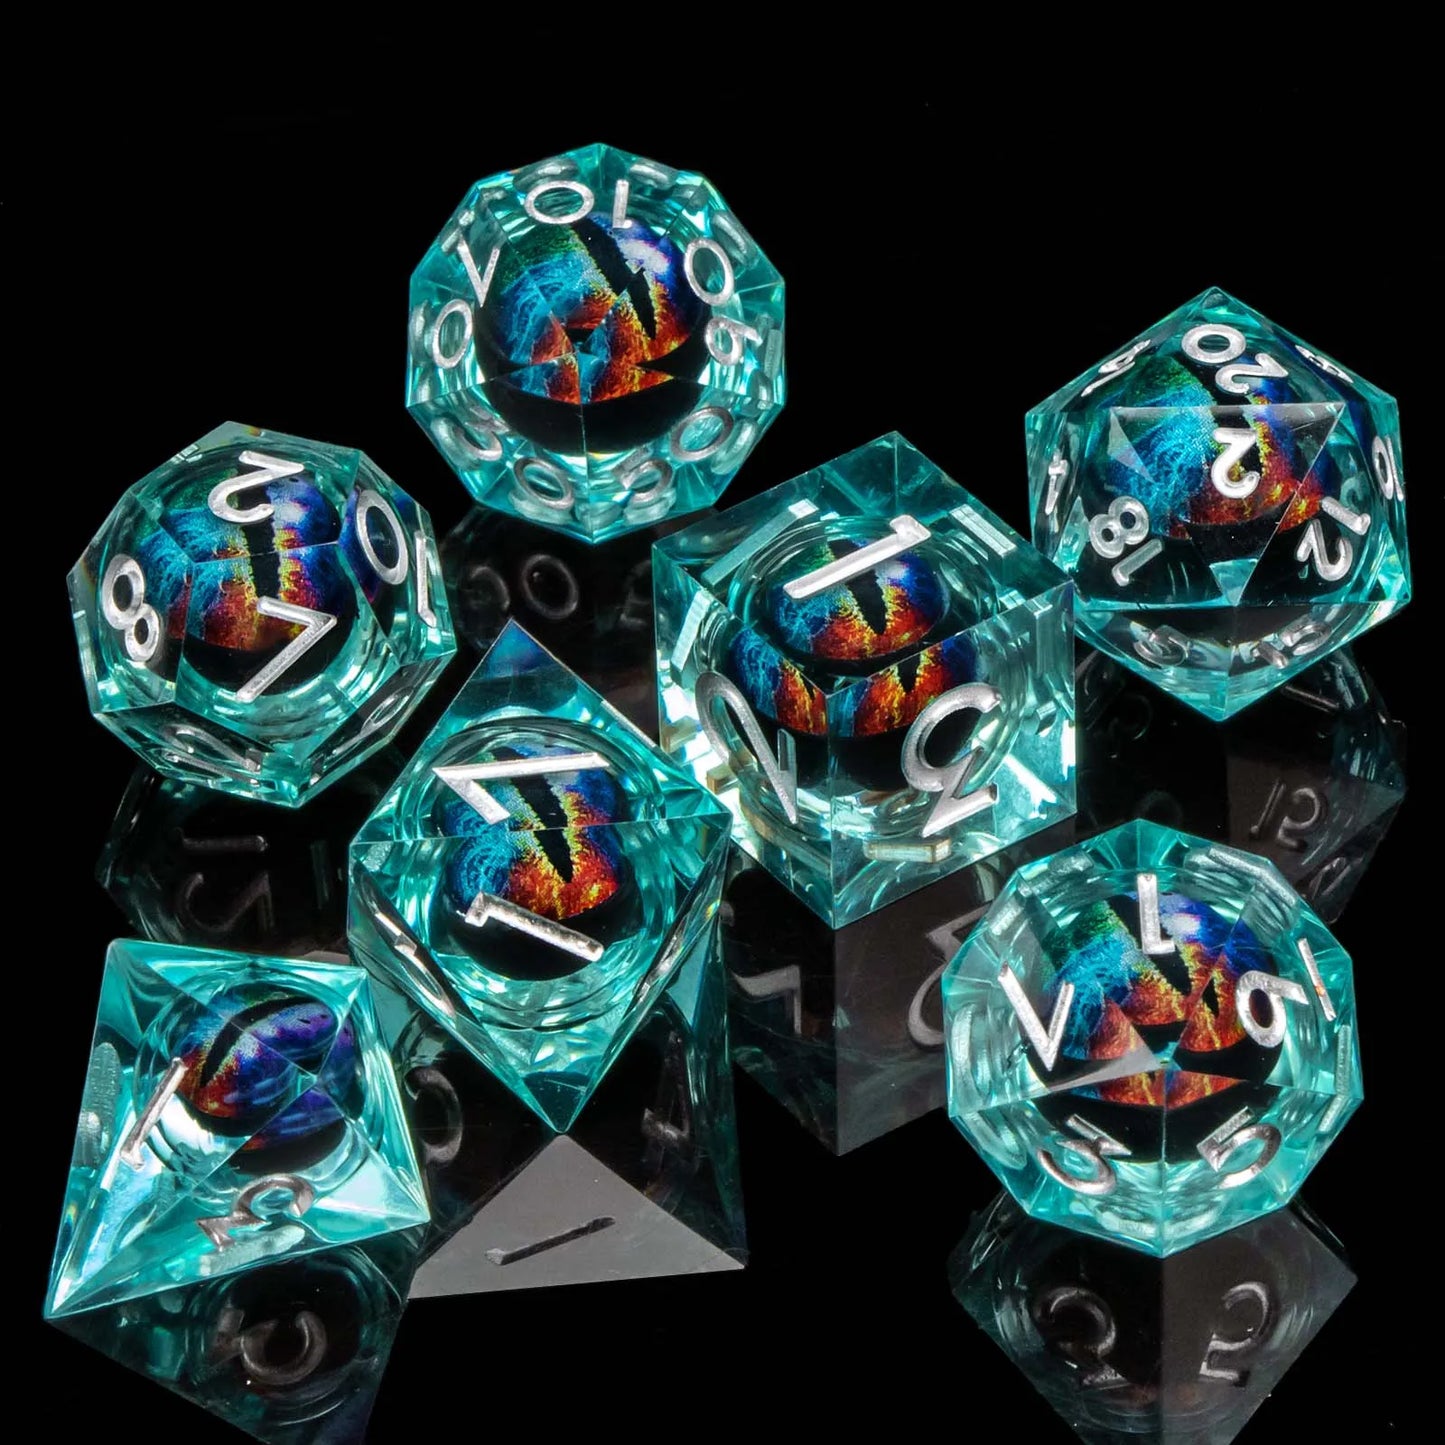 D and D Flowing Sand Sharp Edge Dragon Eye Dnd Resin RPG Polyhedral D&D Dice Set For Dungeon and Dragon Pathfinder Role Playing AZ11